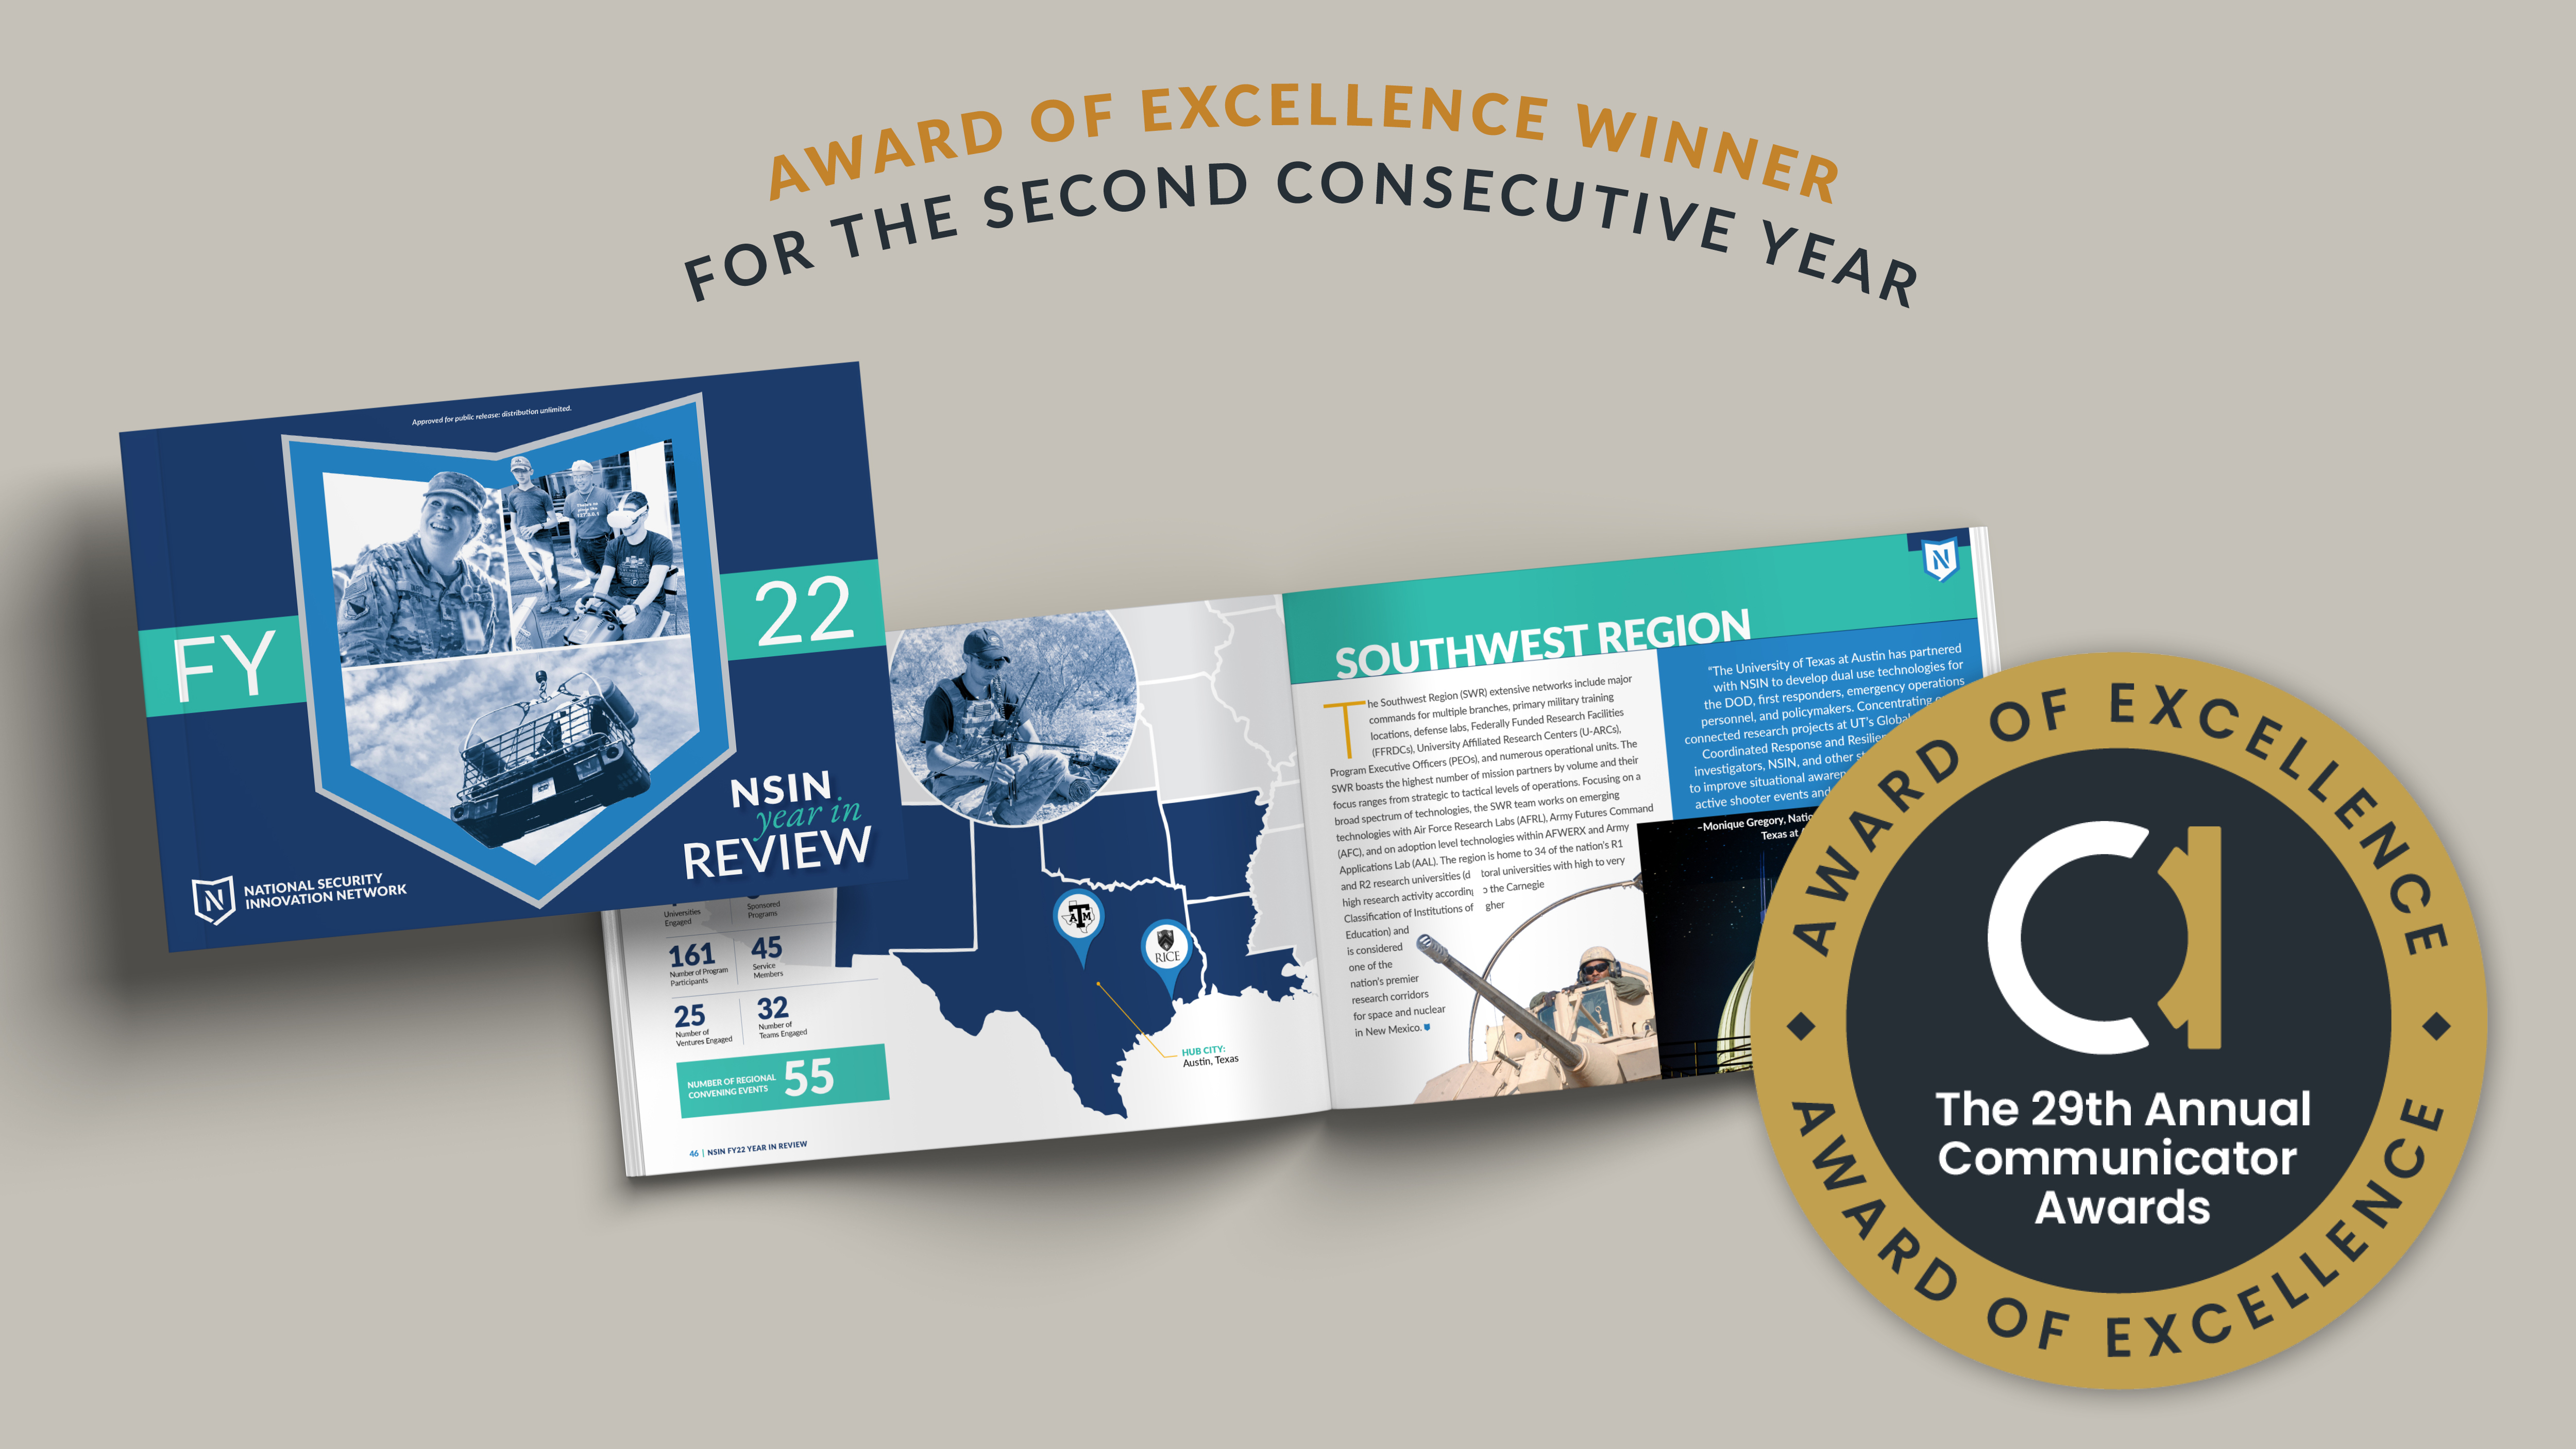 NSIN received honors in four categories in the largest global award program for creative excellence